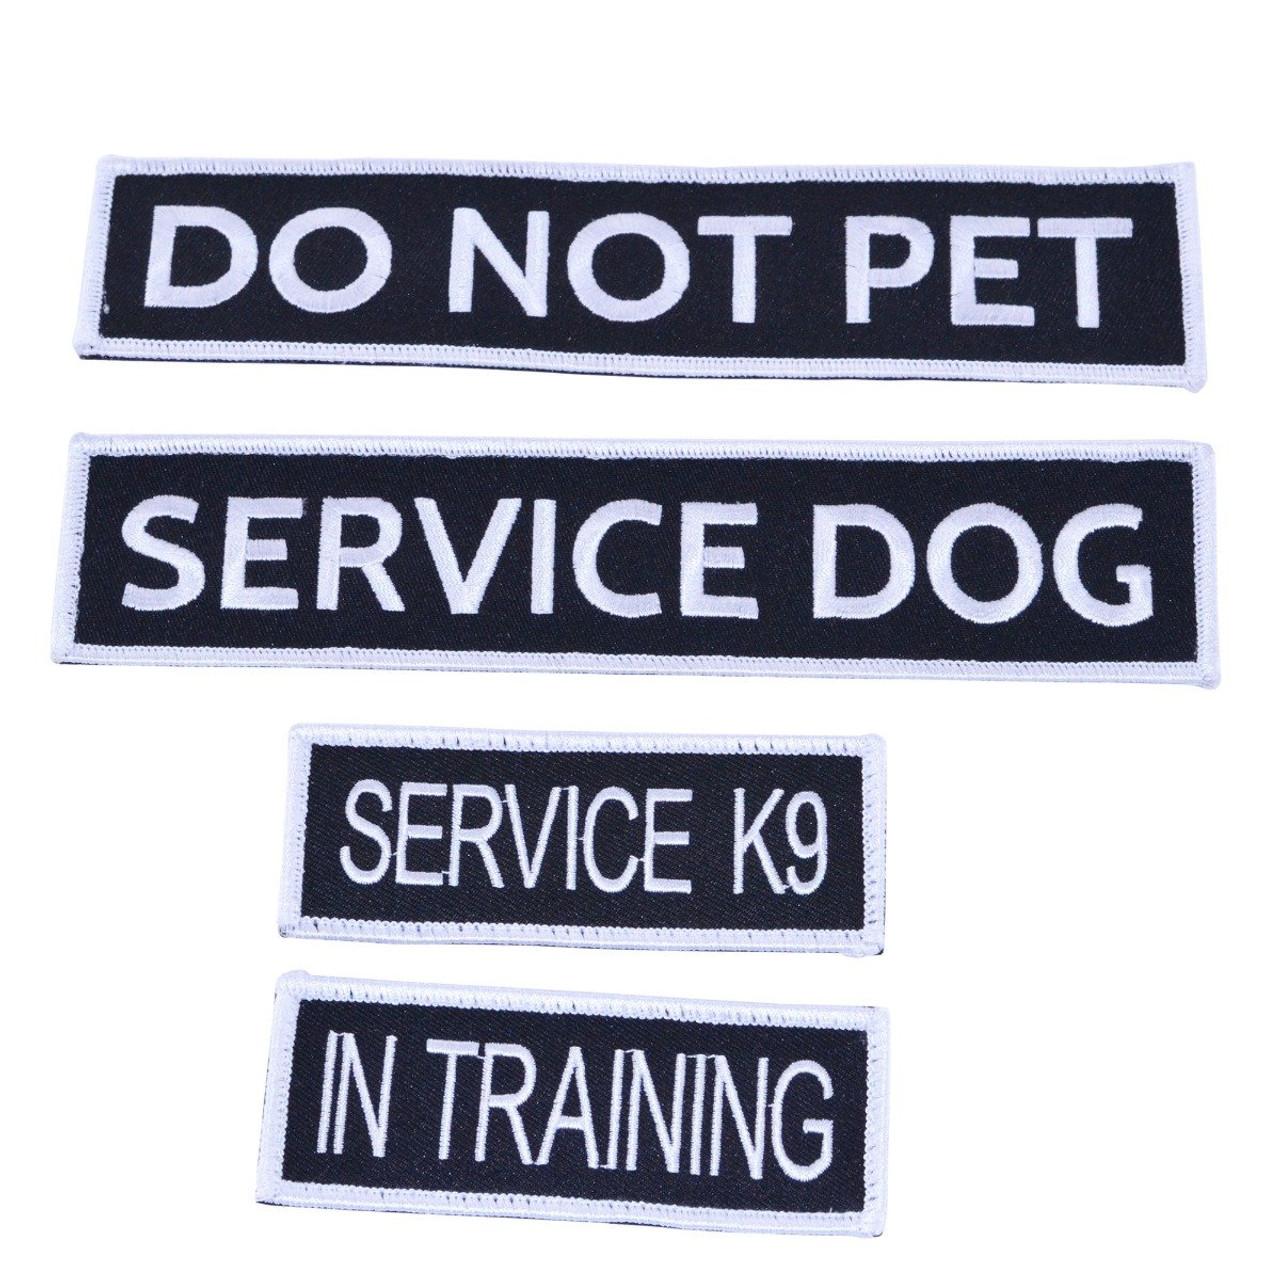 Industrial Puppy Do Not Pet Dog Patches, 2 Count